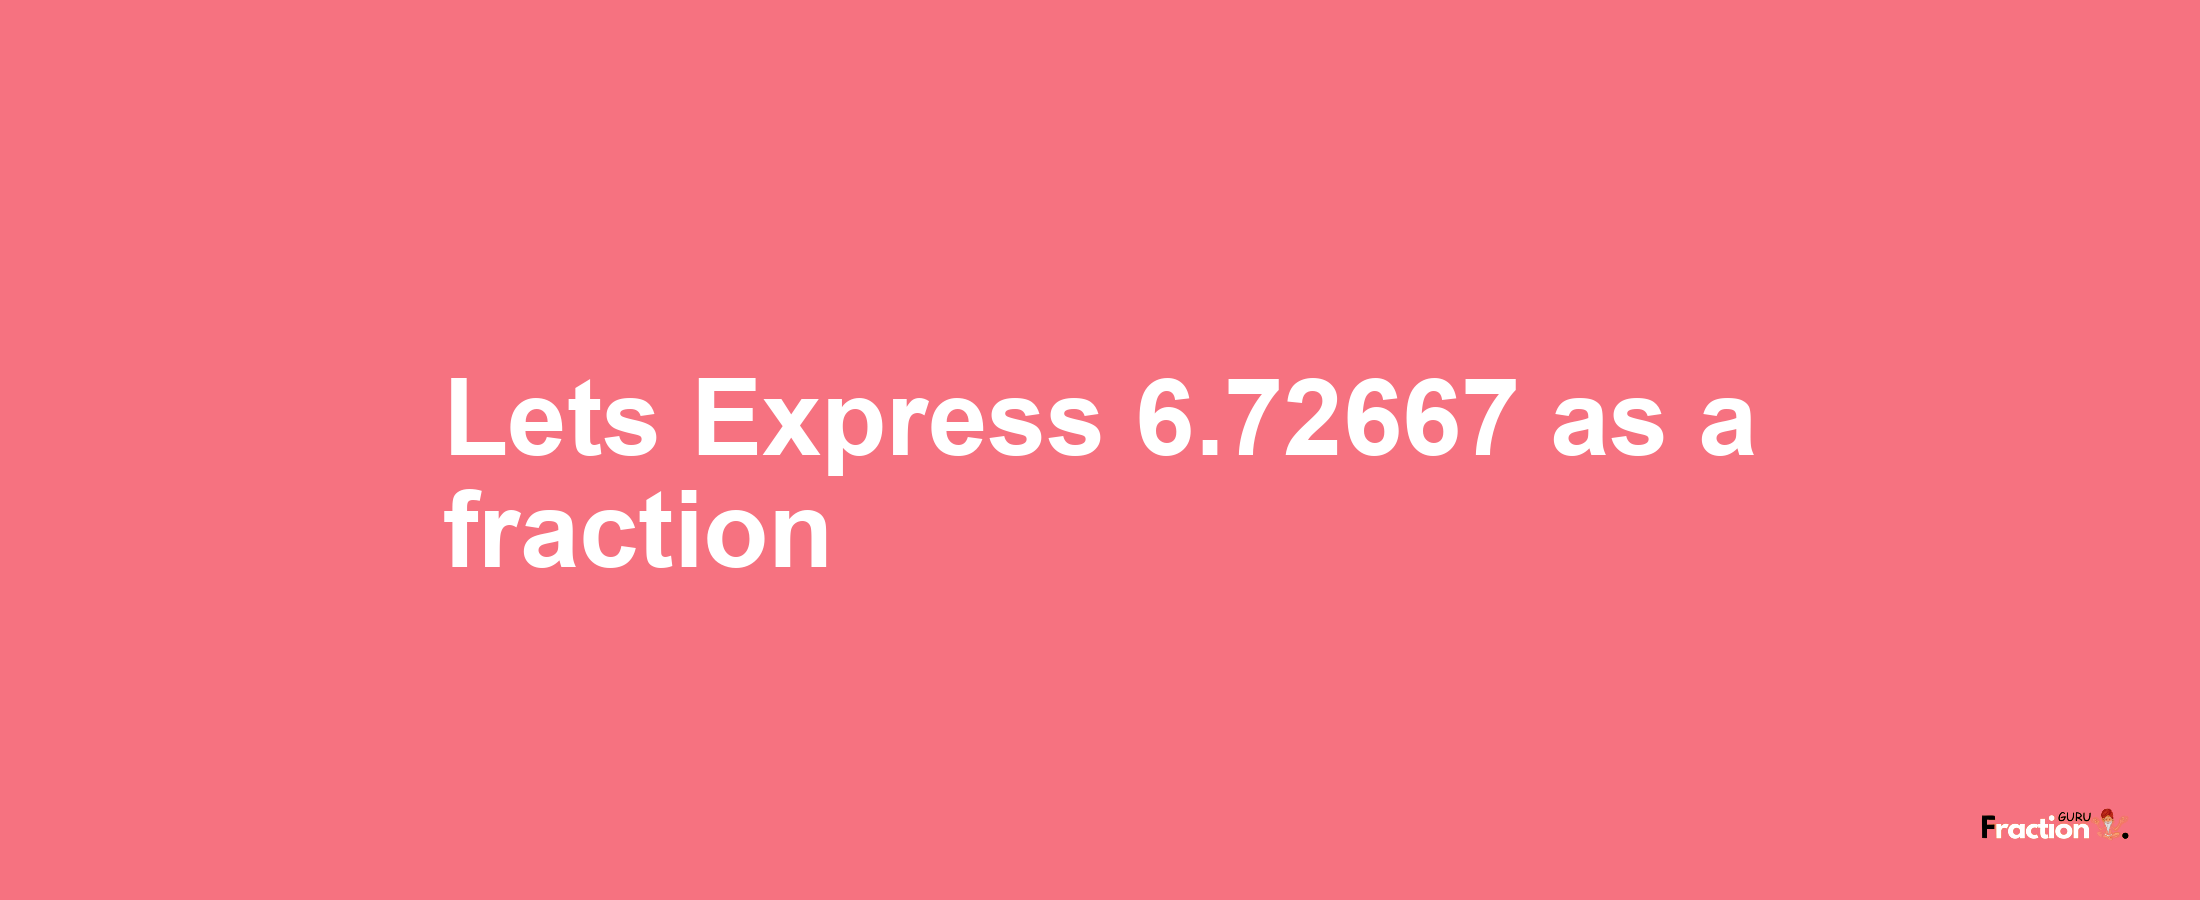 Lets Express 6.72667 as afraction